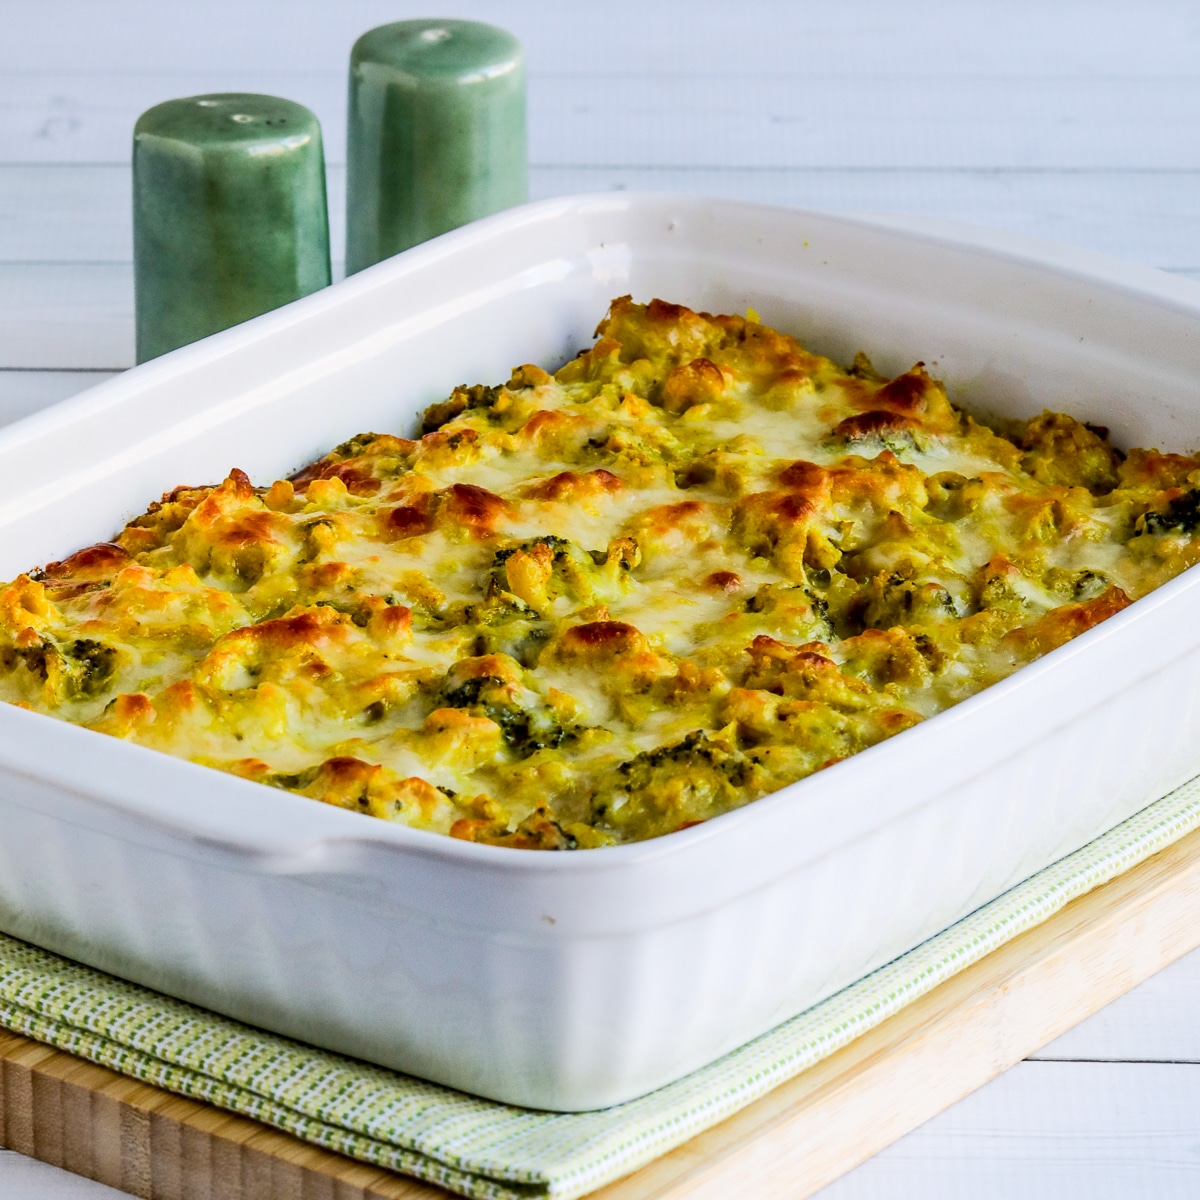 Square image for Chicken Broccoli Curry Casserole with Cauliflower Rice shown in baking pan on napkin and cutting board.